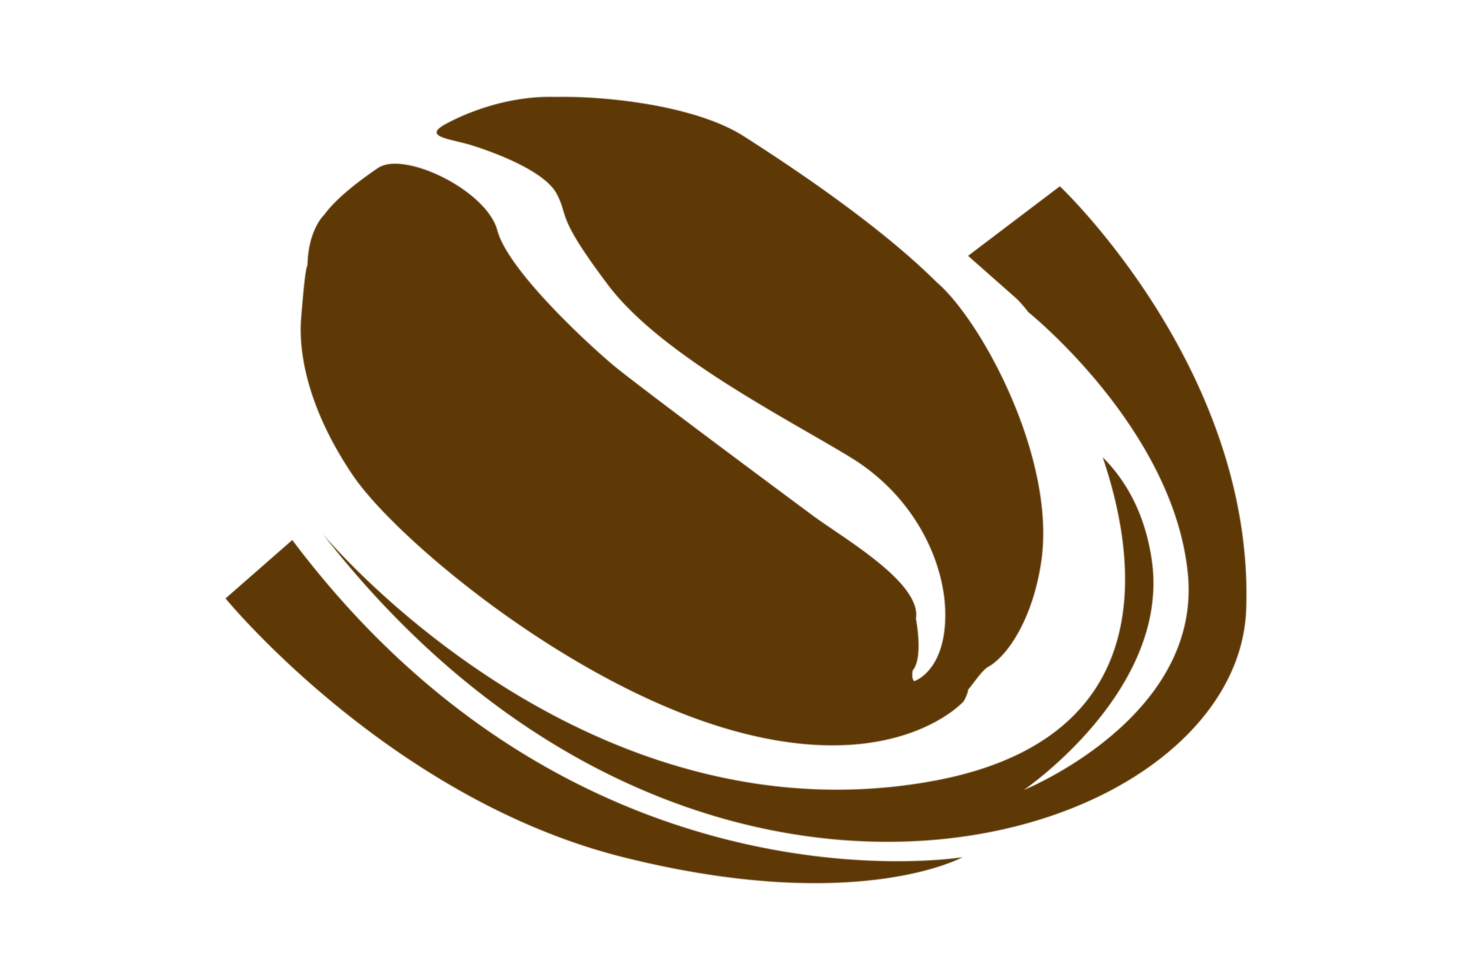 koffie Boon logo Aan transparant achtergrond png